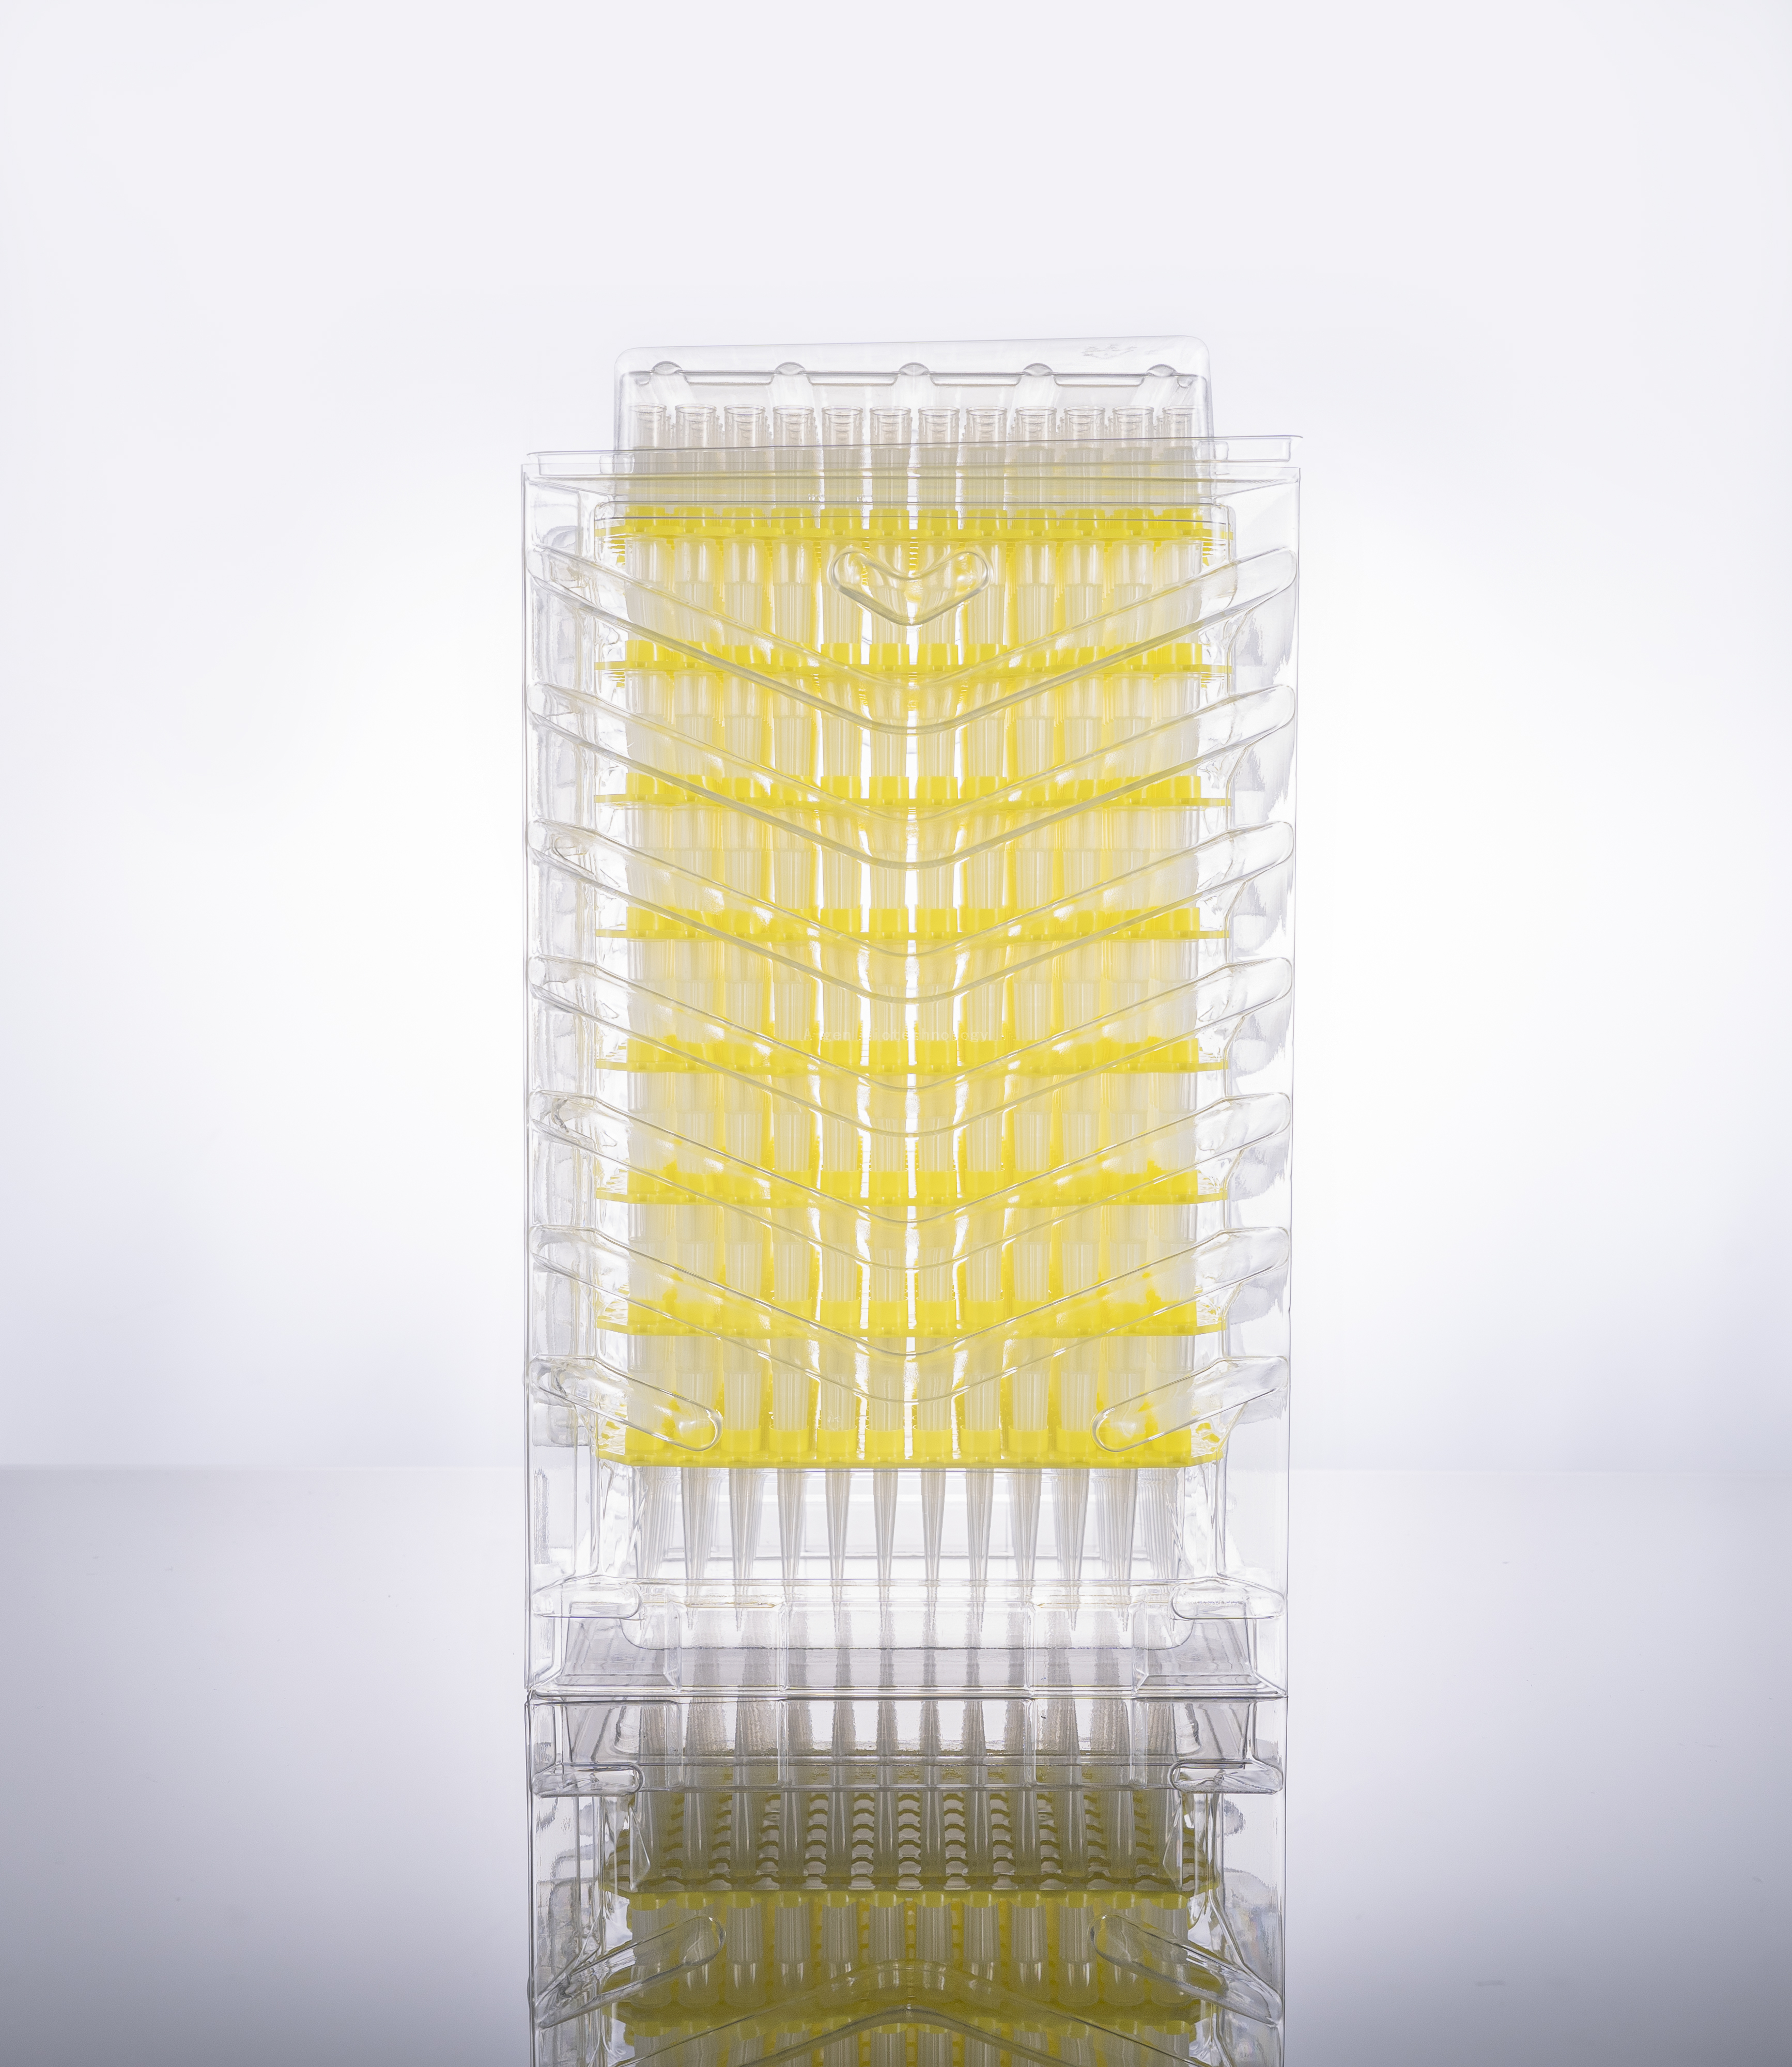 LTS Rainin 300μL Transparent Pipette Tips with Packed in Reload System